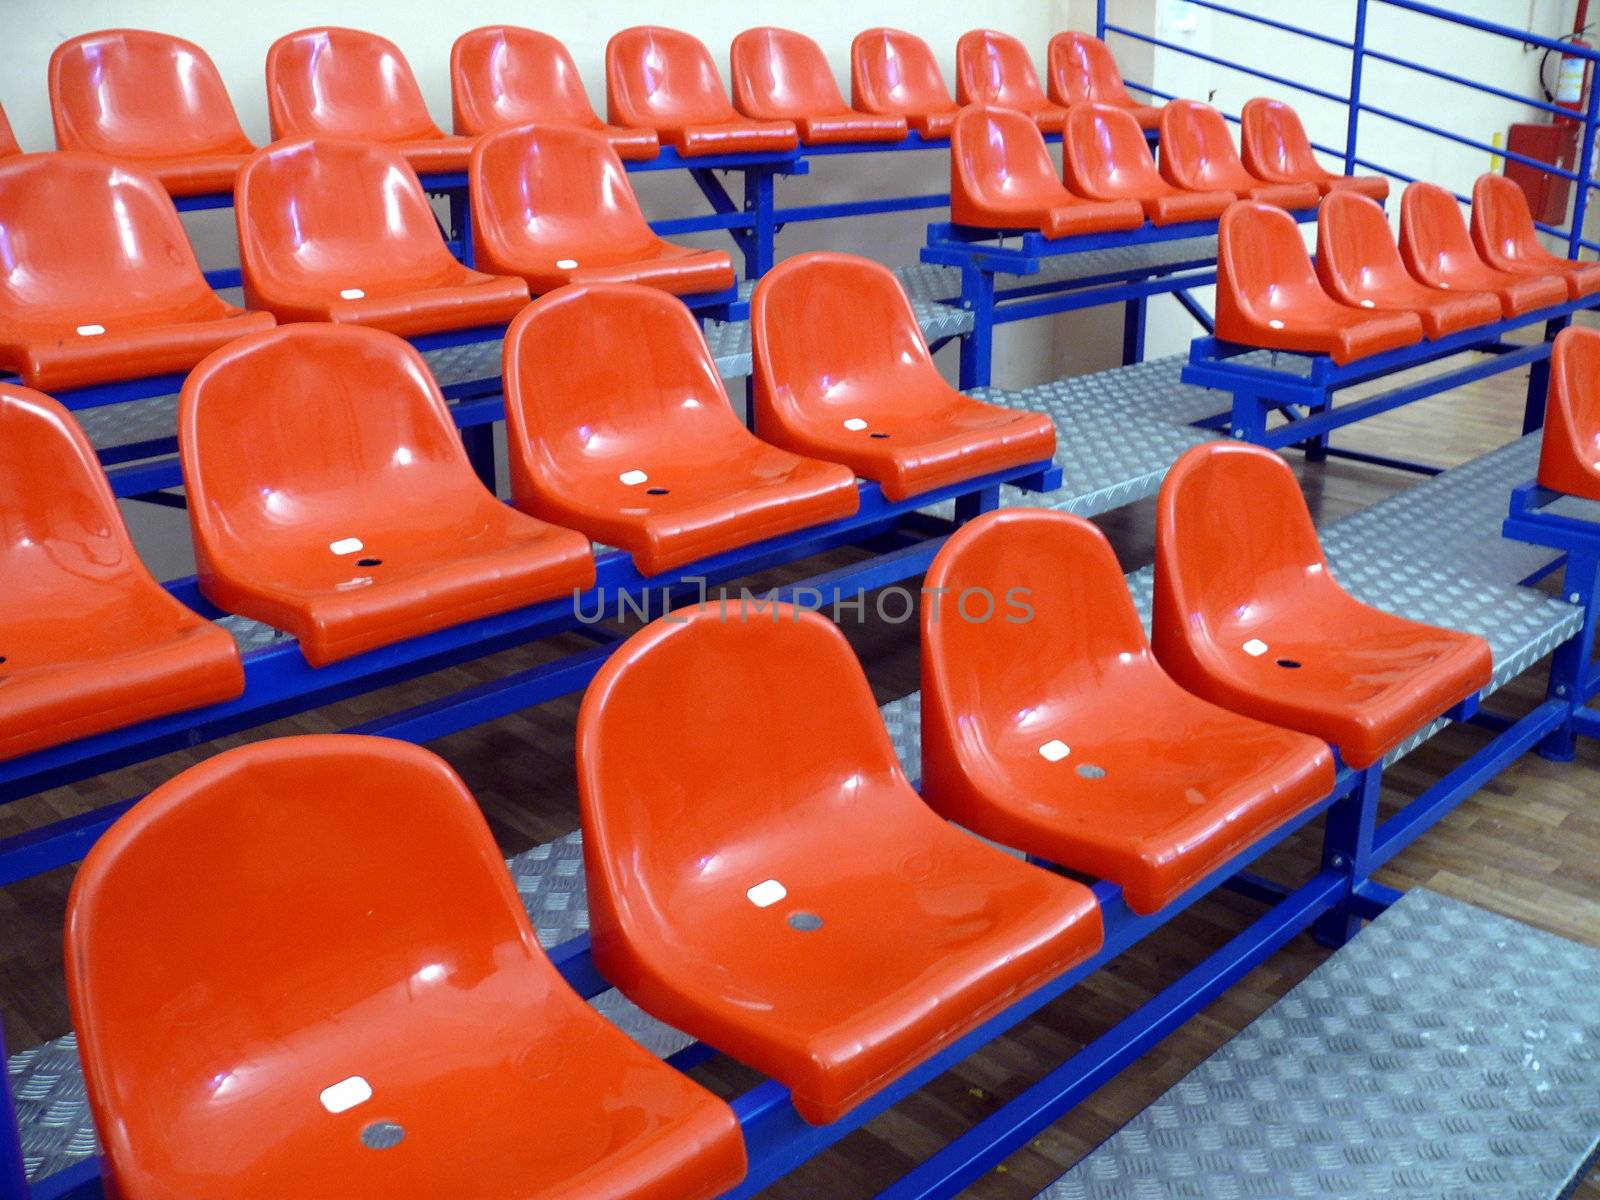 Red seats in ice area by Stoyanov